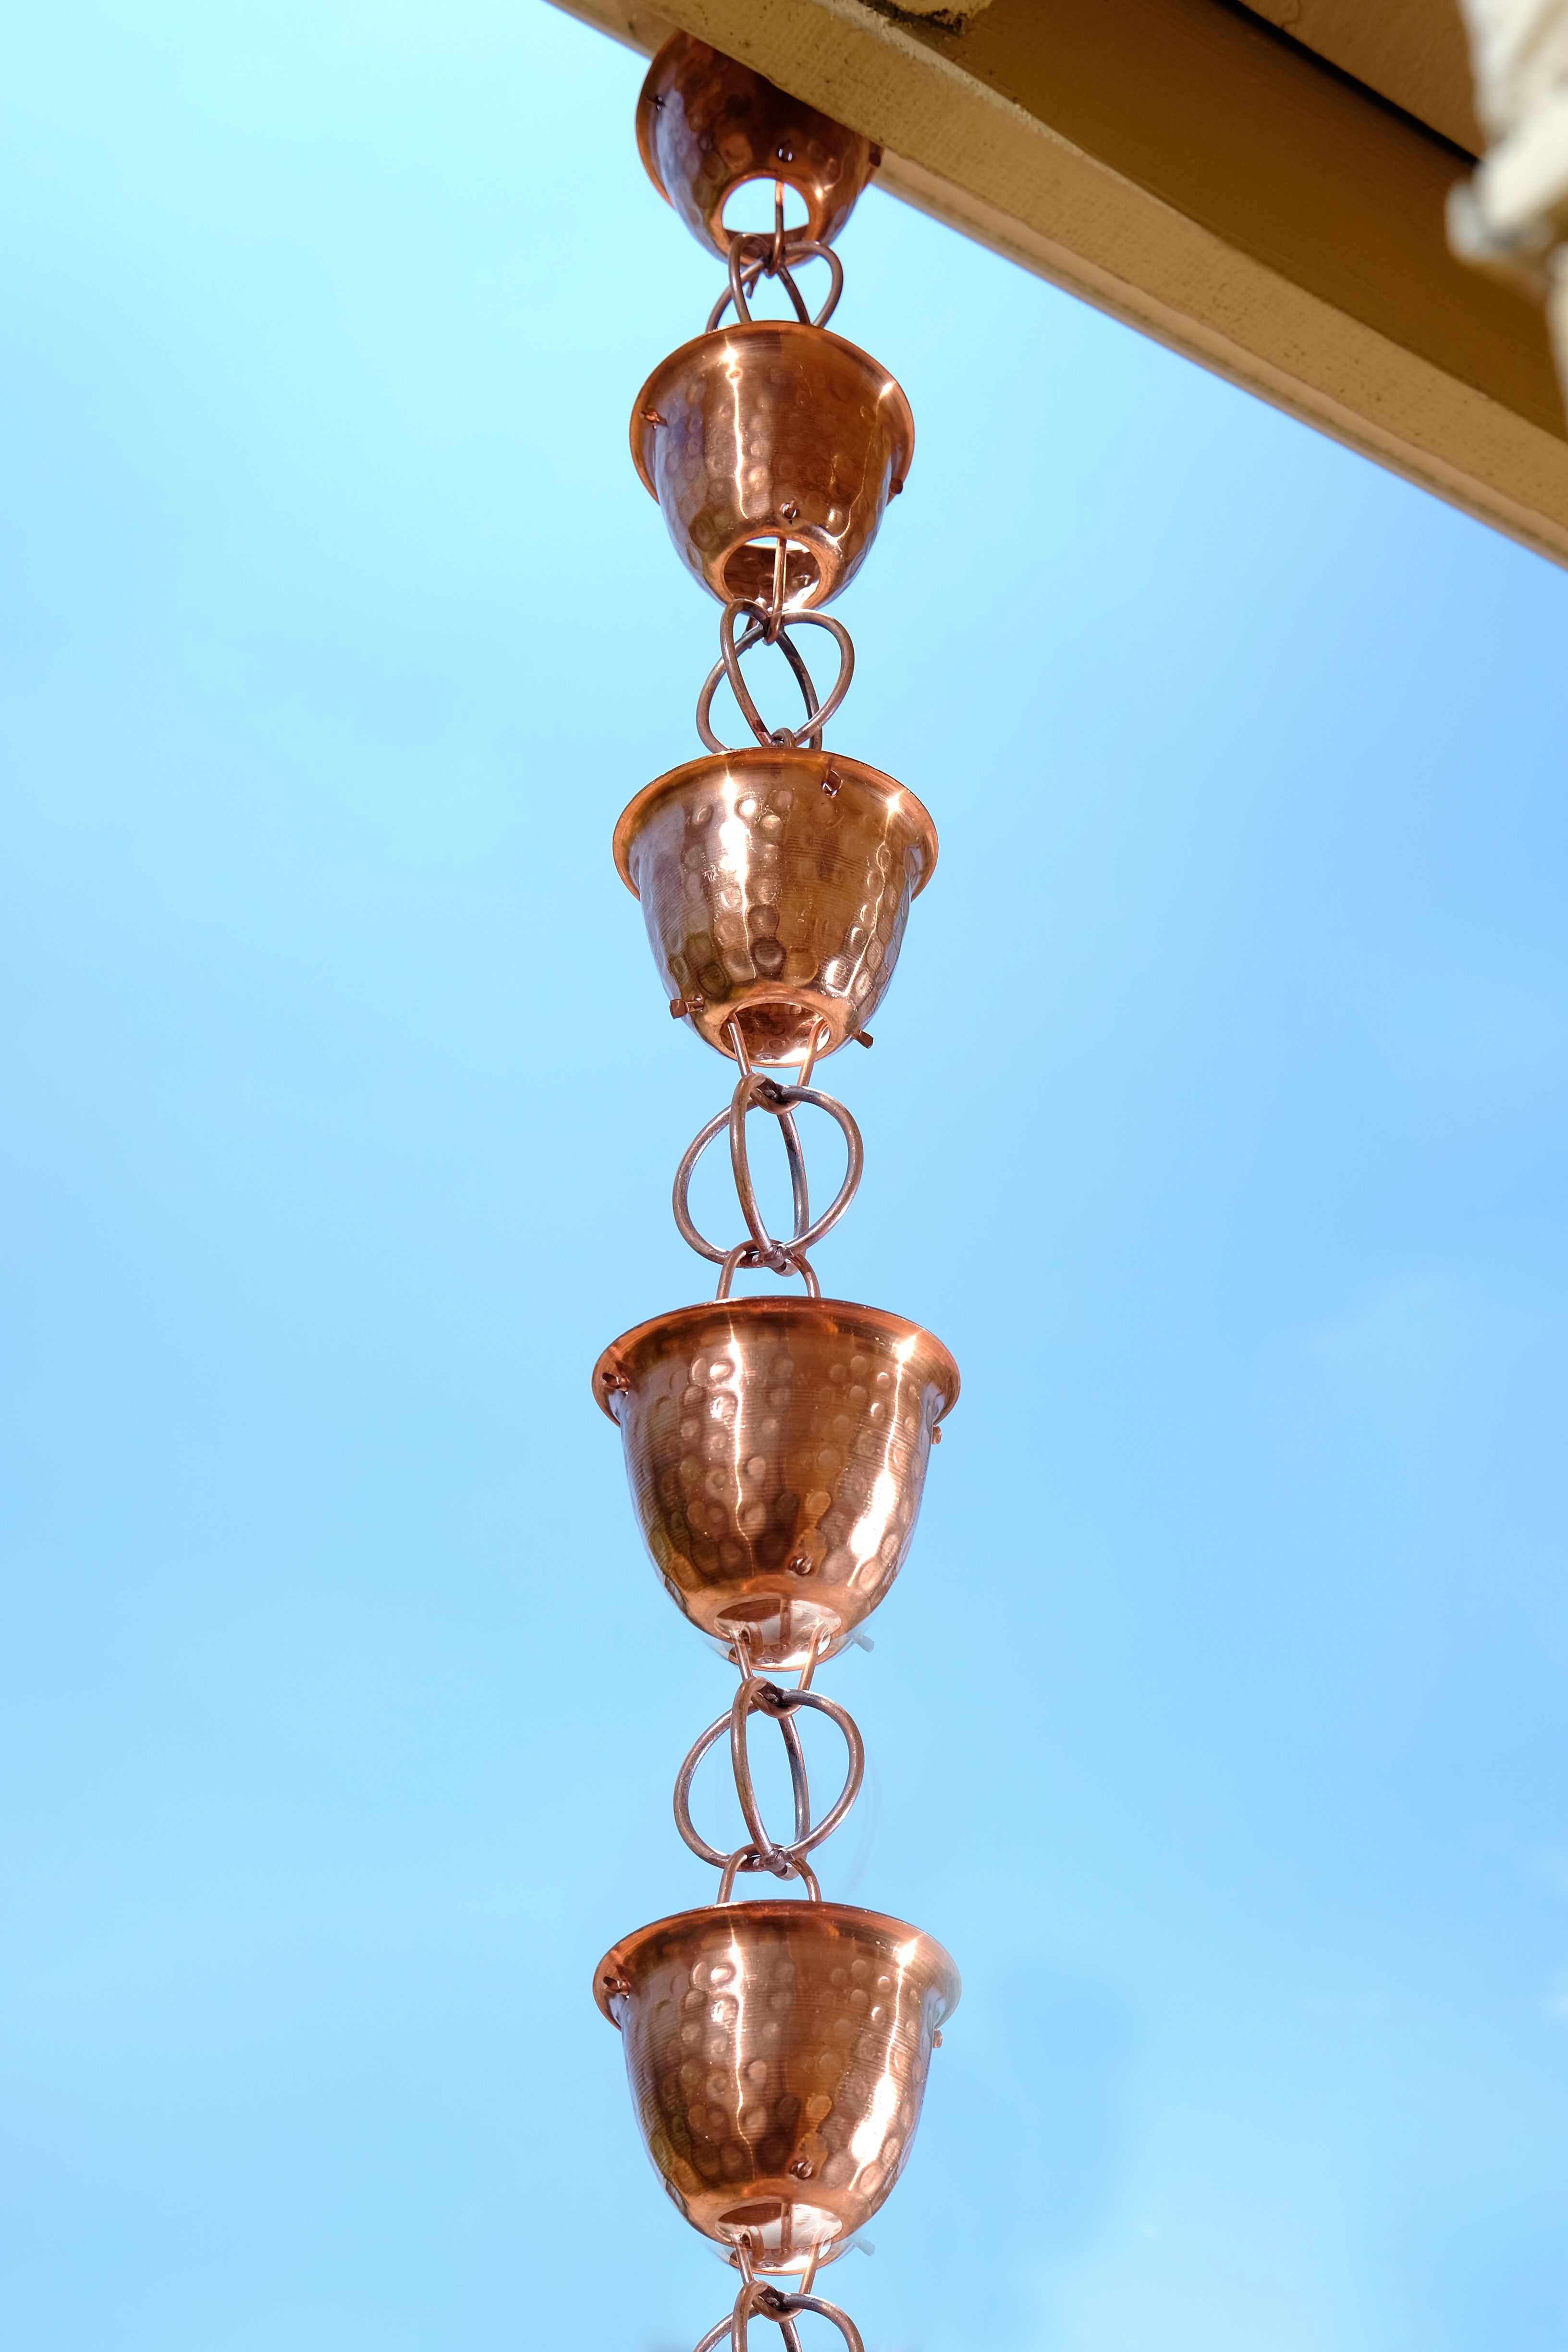 Monarch Rain Chains Pure Copper Hammered Cup Rain Chain Replacement Downspout for Gutters, 8.5 ft L - image 4 of 10